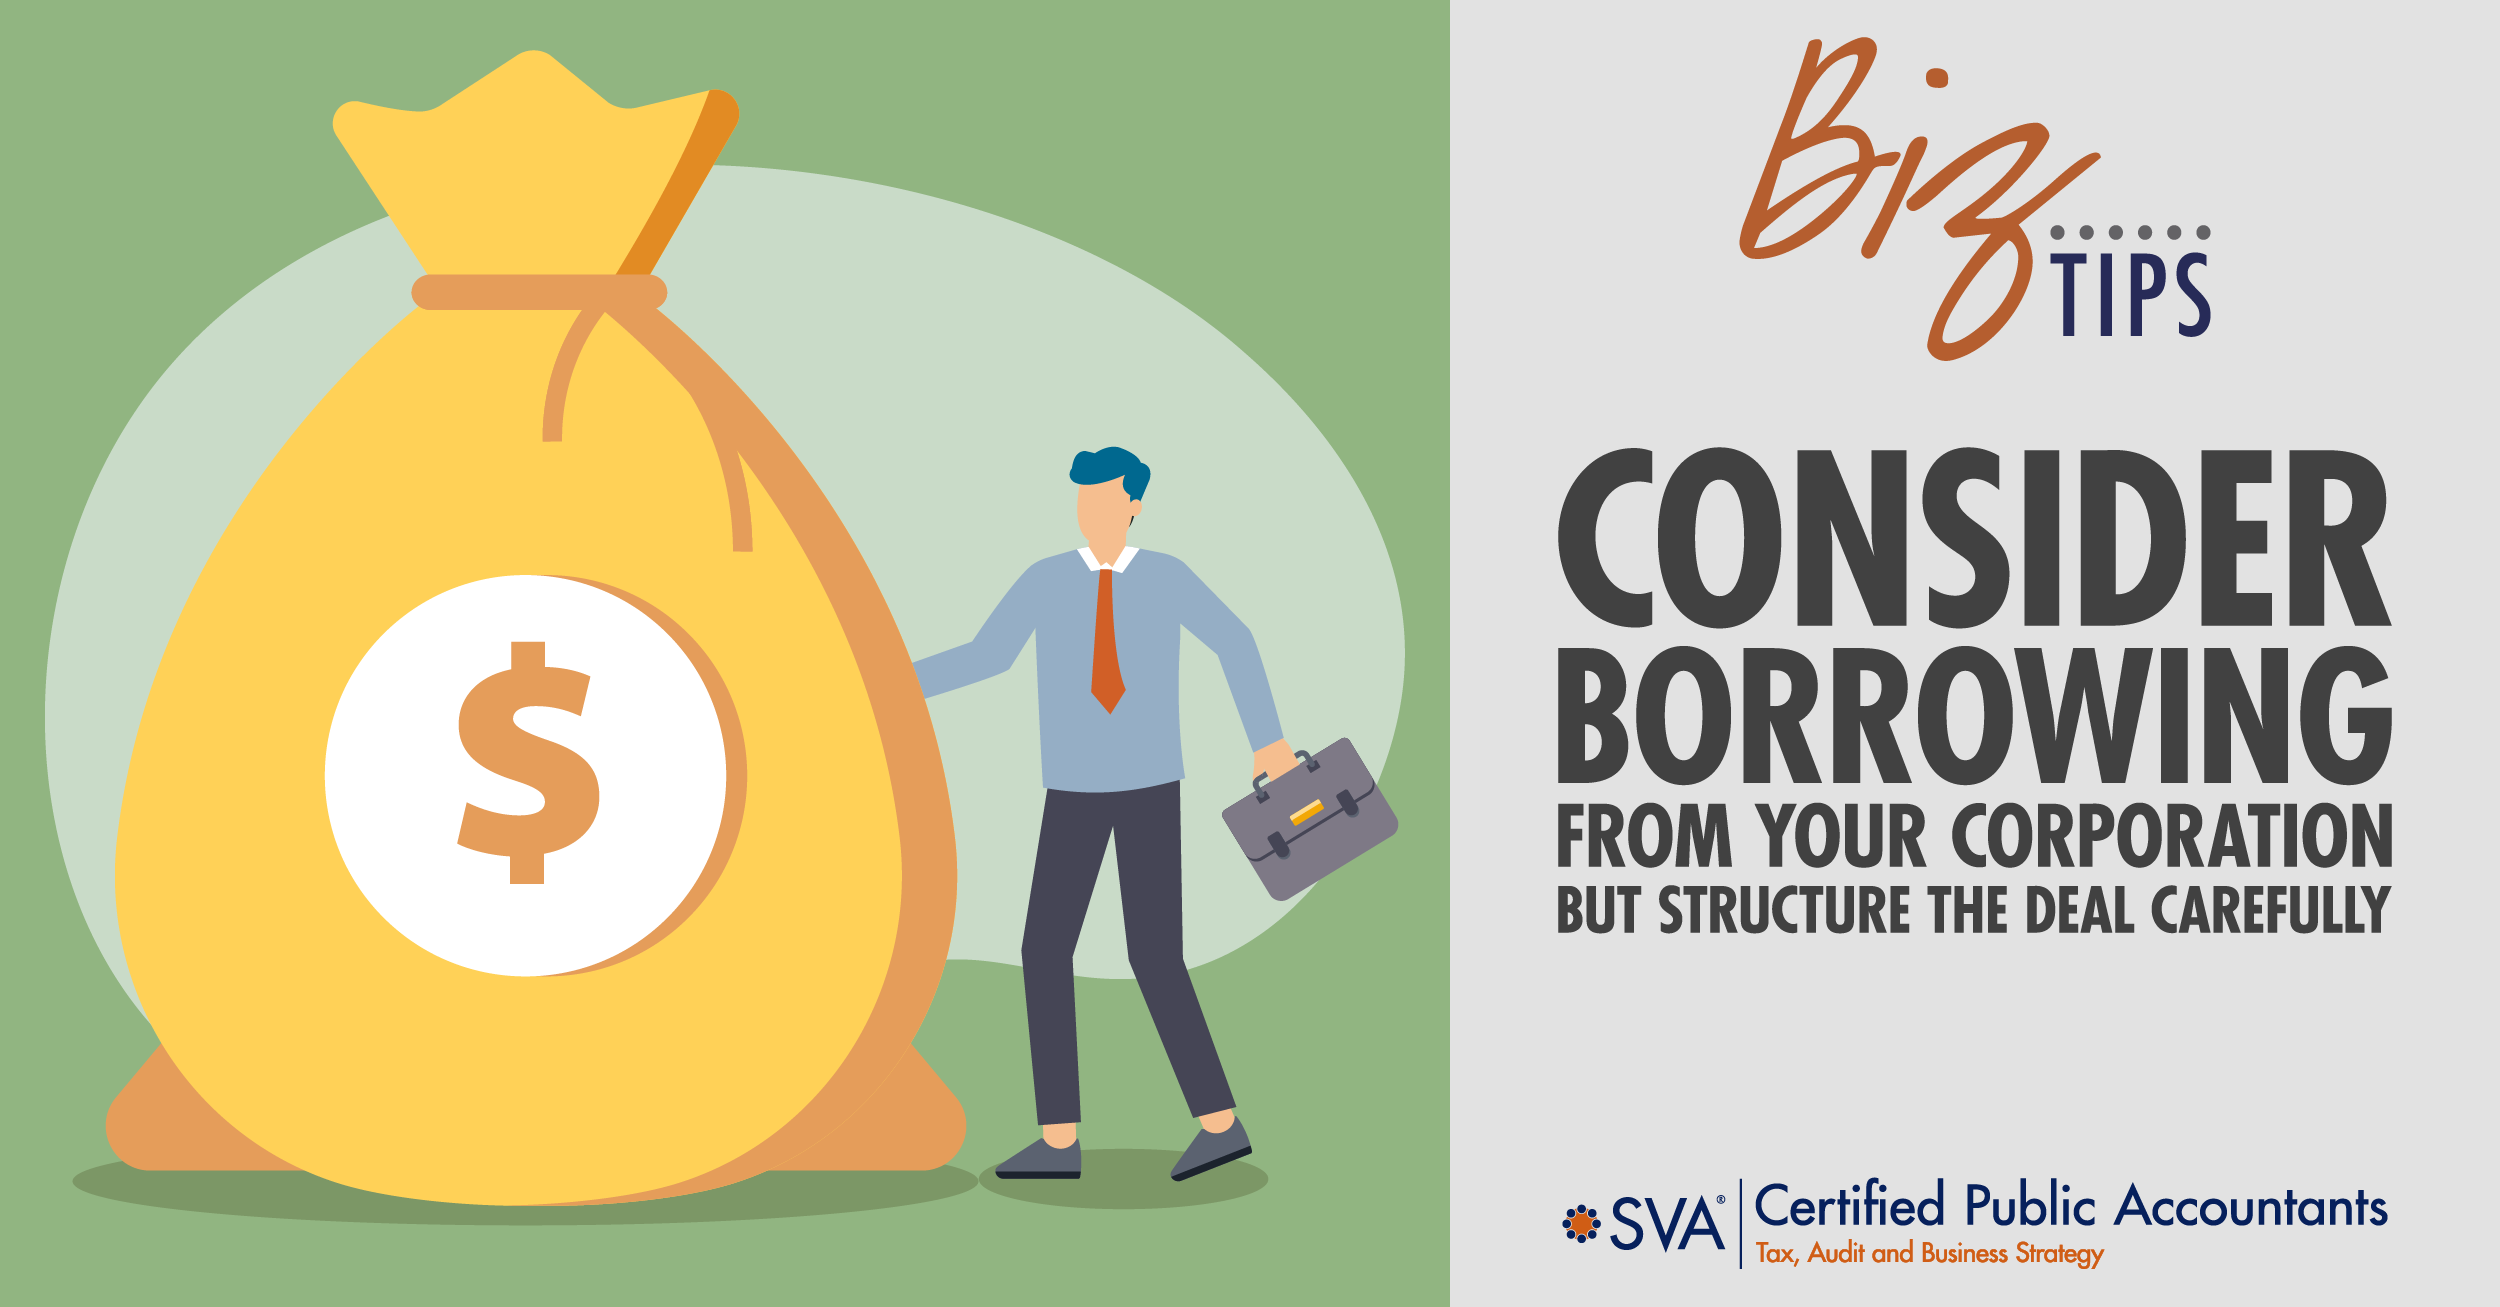 Consider Borrowing From Your Corporation But Structure the Deal Carefully